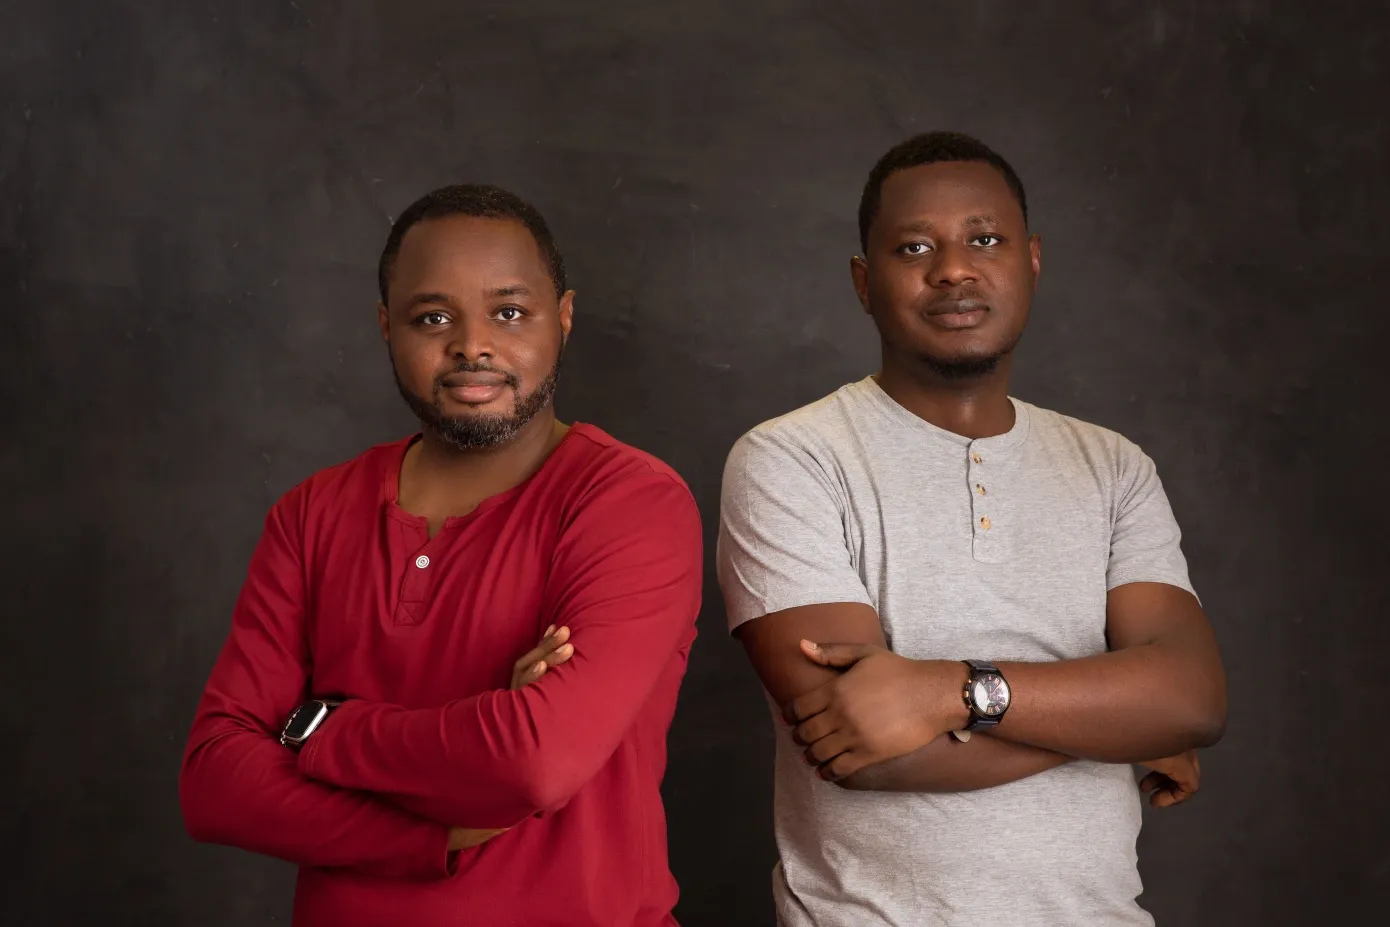 CredPal secures $15m in debt and equity funding, to expand its BNPL product across Africa